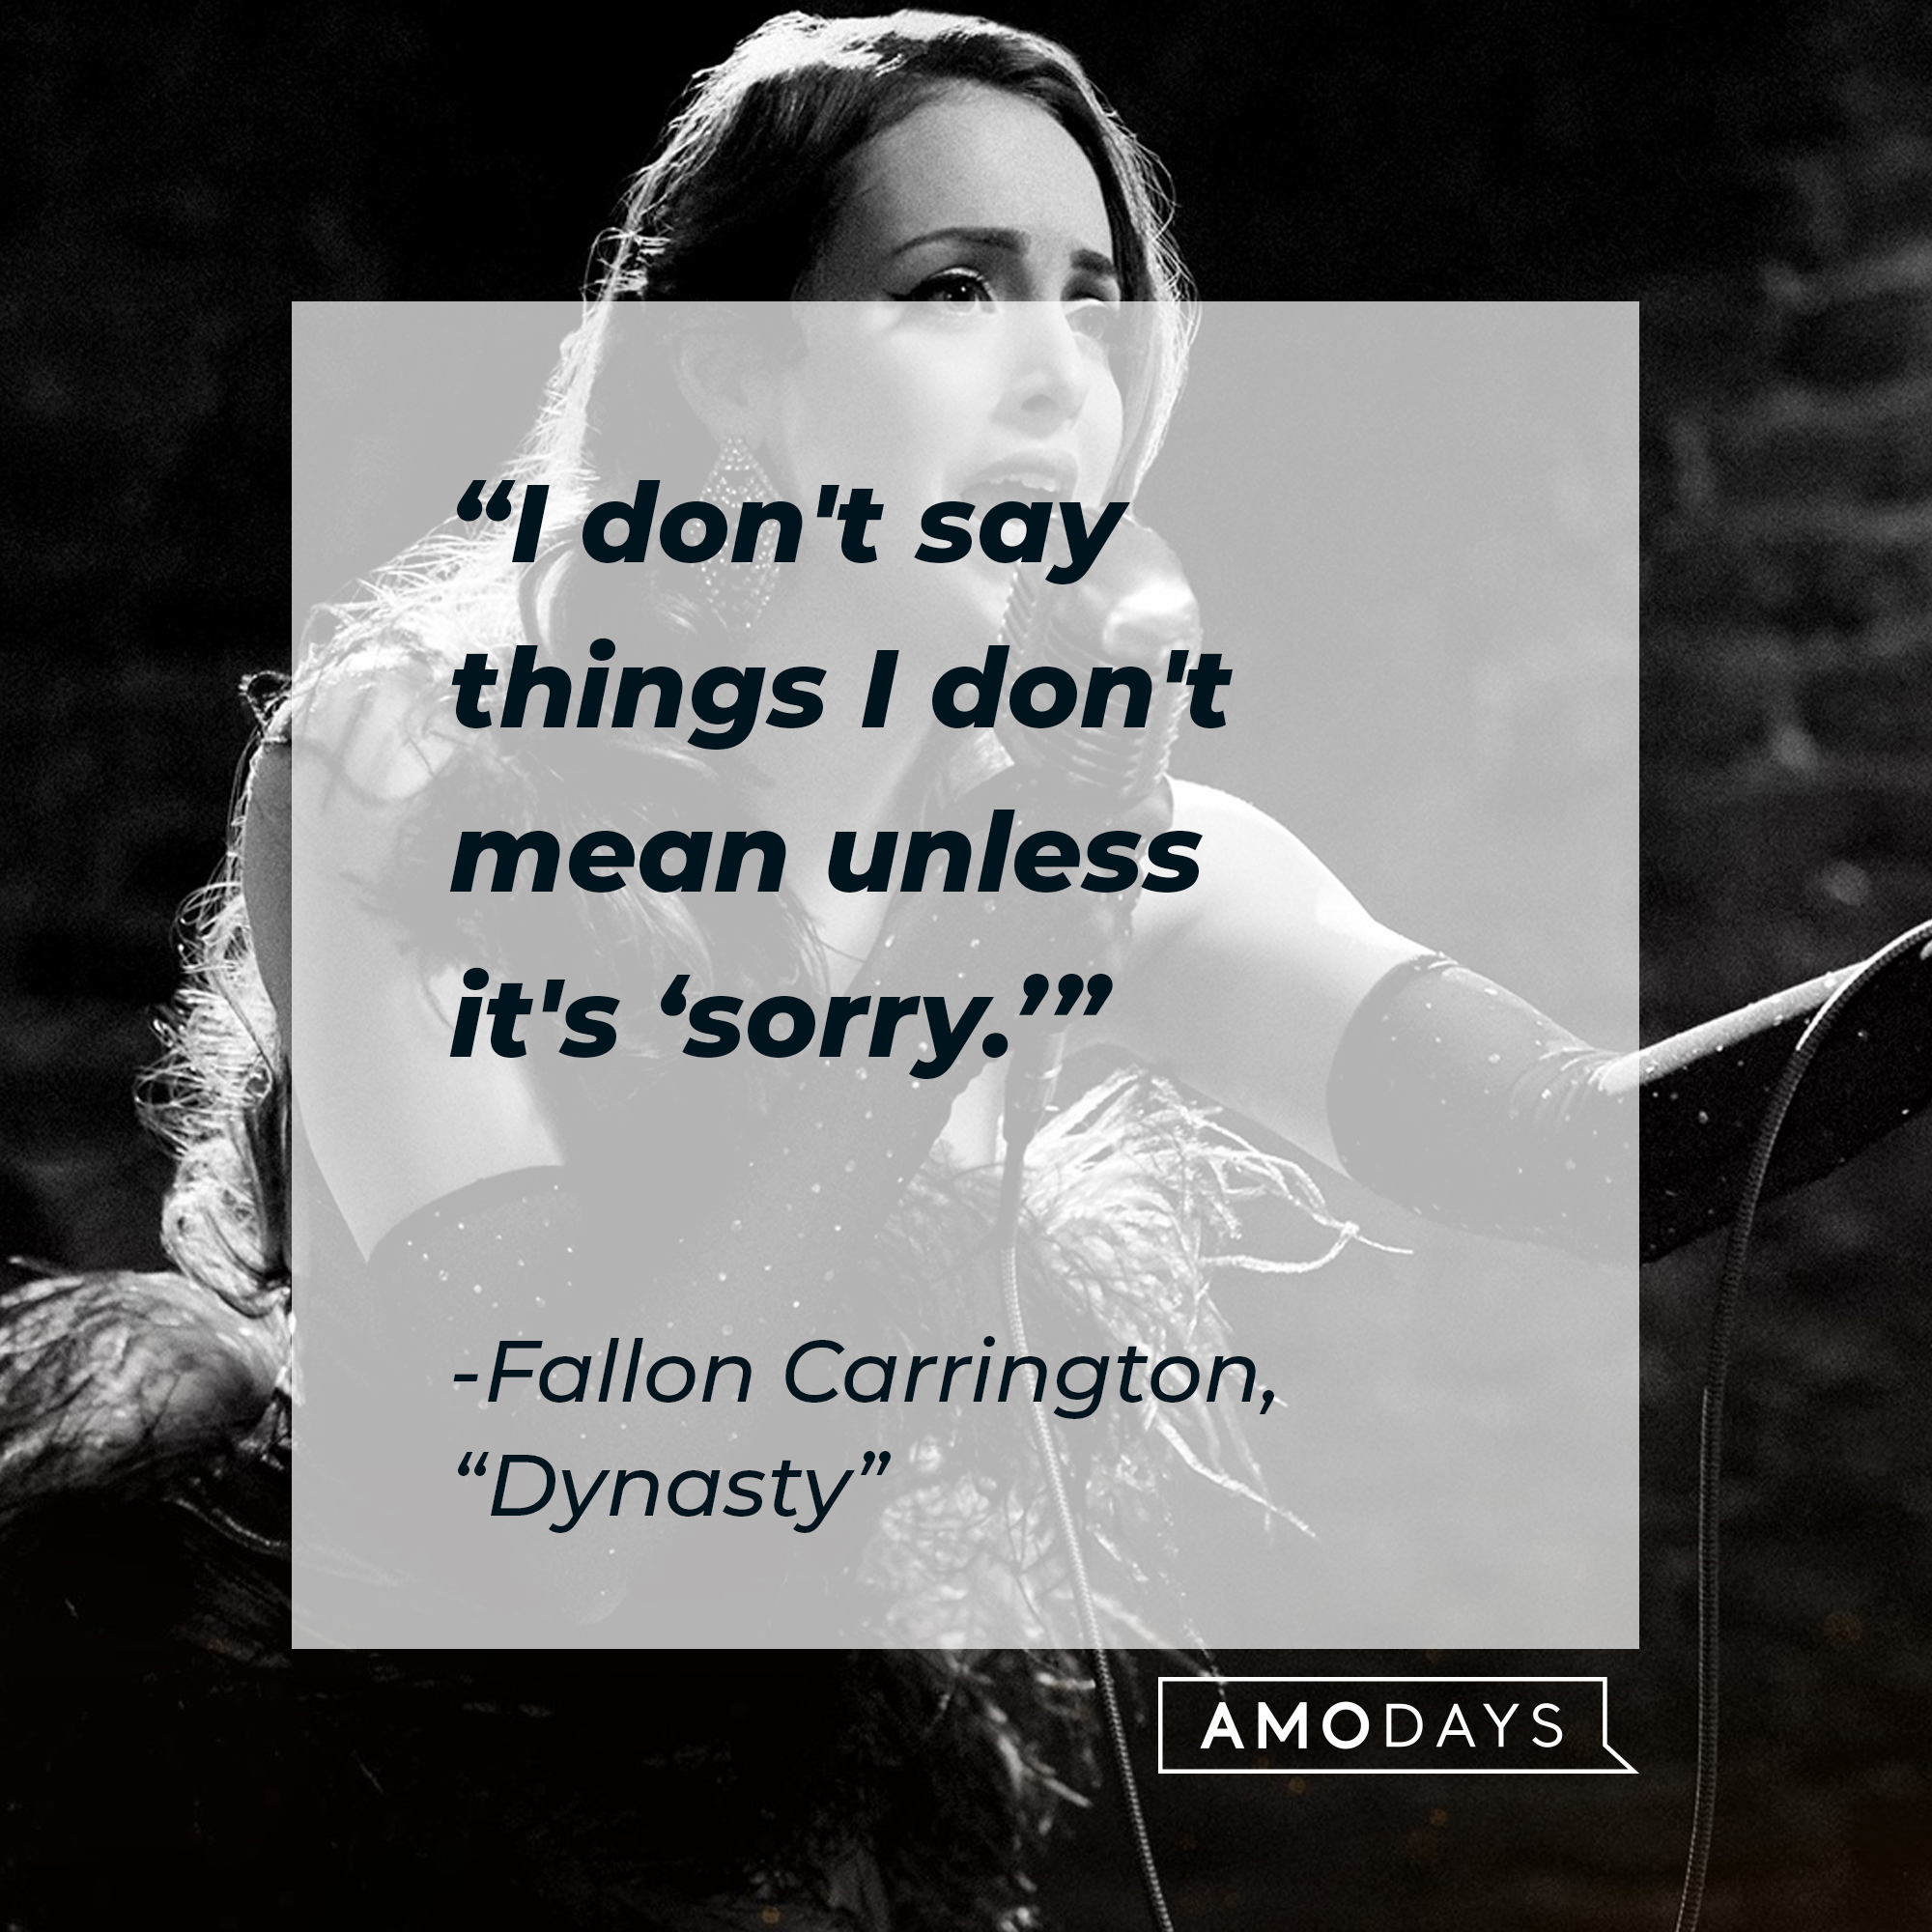 Fallon Carrington’s quote from “Dynasty”: “I don't say things I don't mean unless it's 'sorry.'” | Source: facebook.com/DynastyOnTheCW